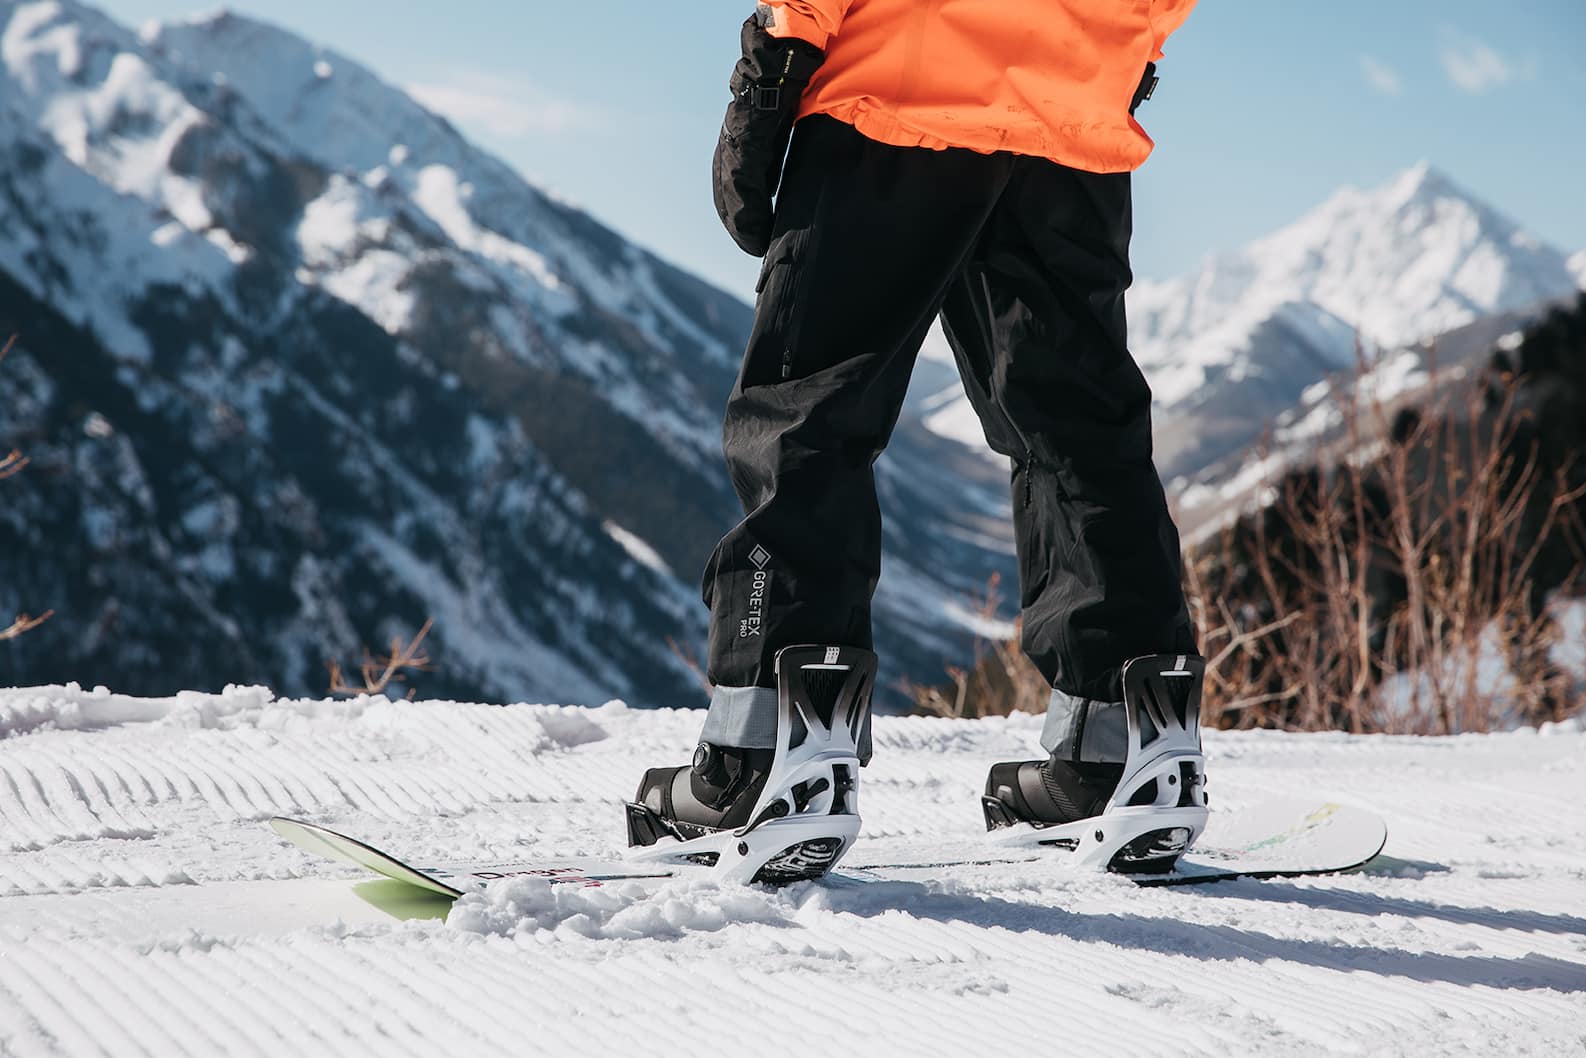 Step into Adventure: Snowboarding Boots for Comfort And Performance